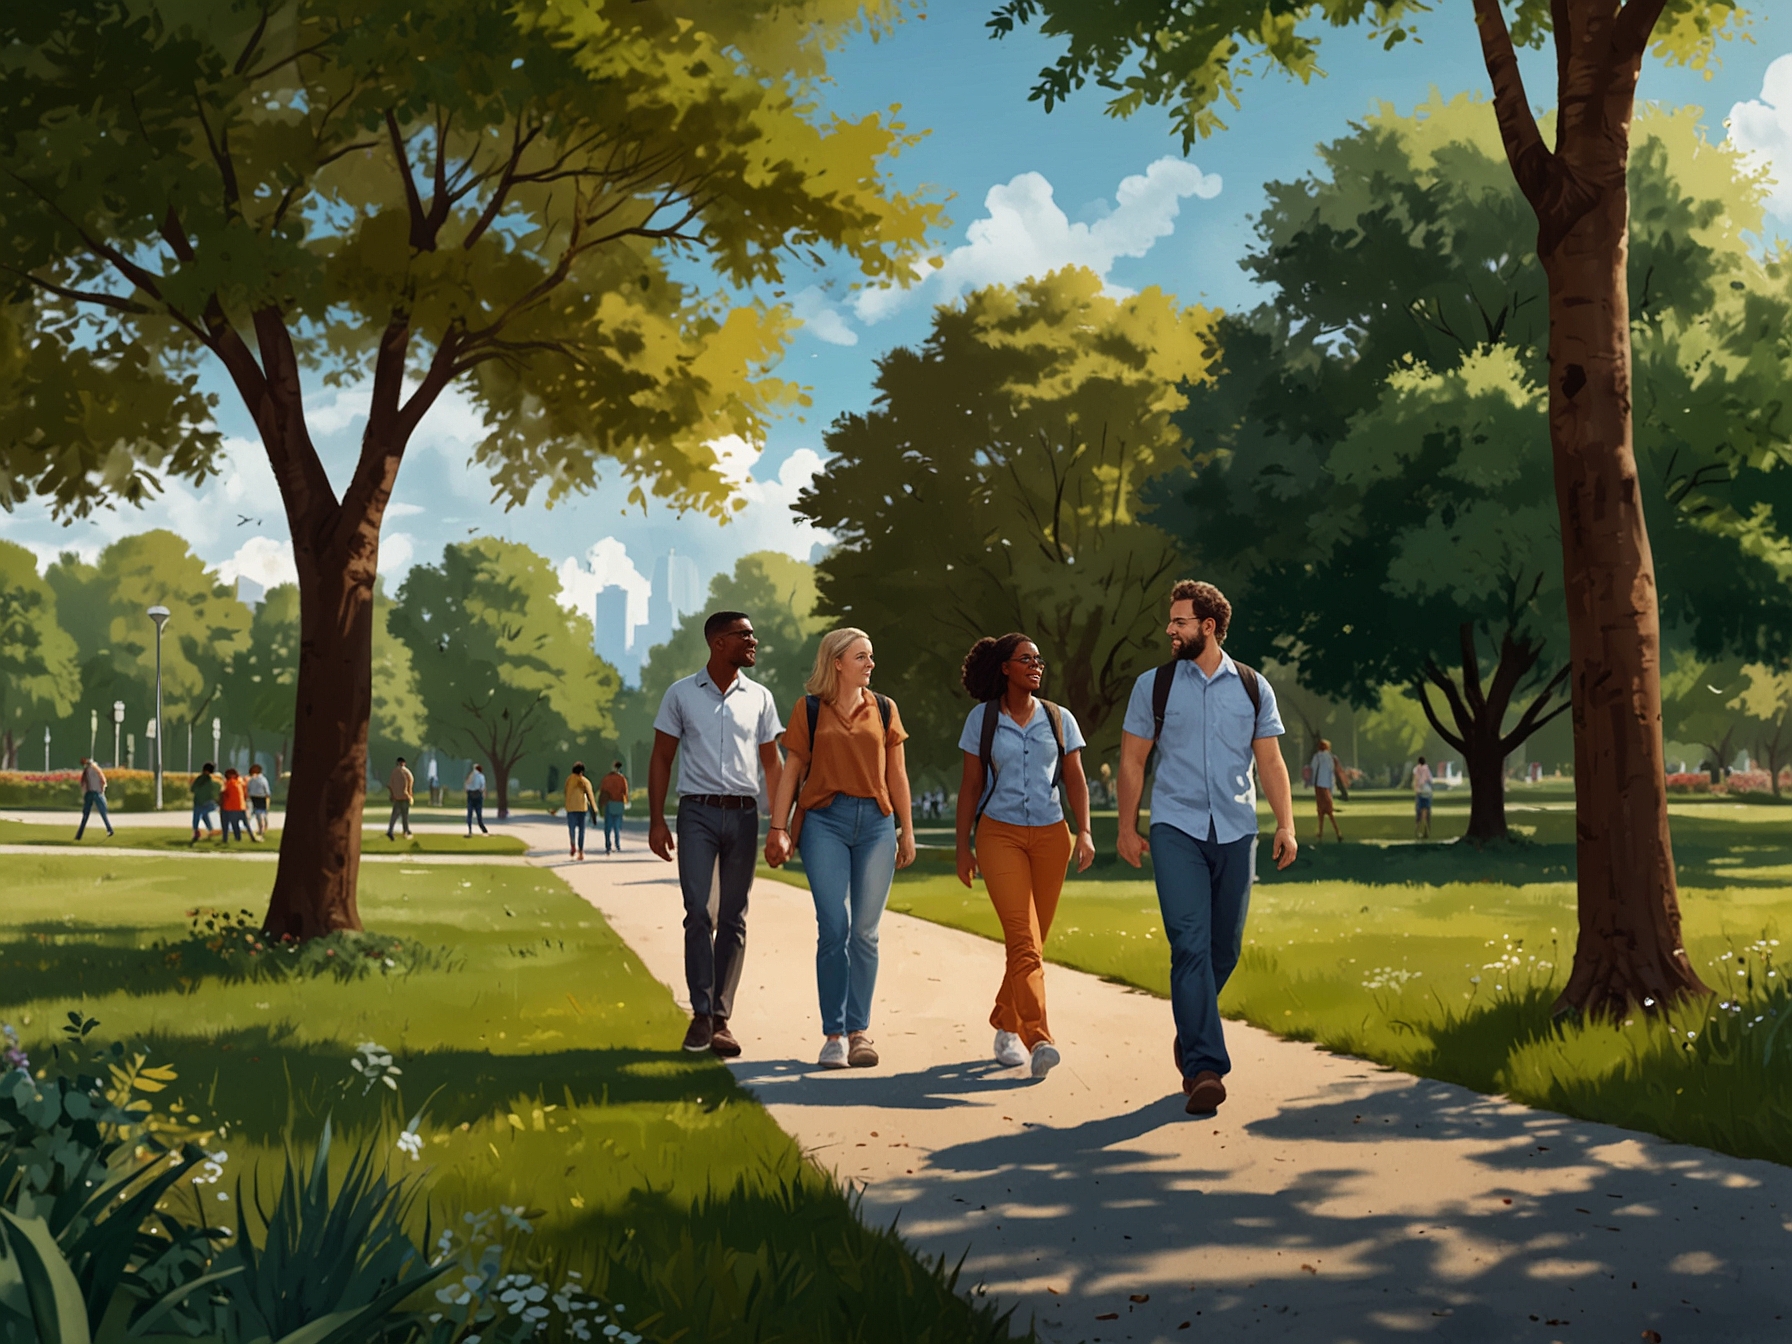 A group of diverse individuals walking in a park, enjoying the outdoors. This conveys the social and community aspects of walking while promoting physical and mental health.